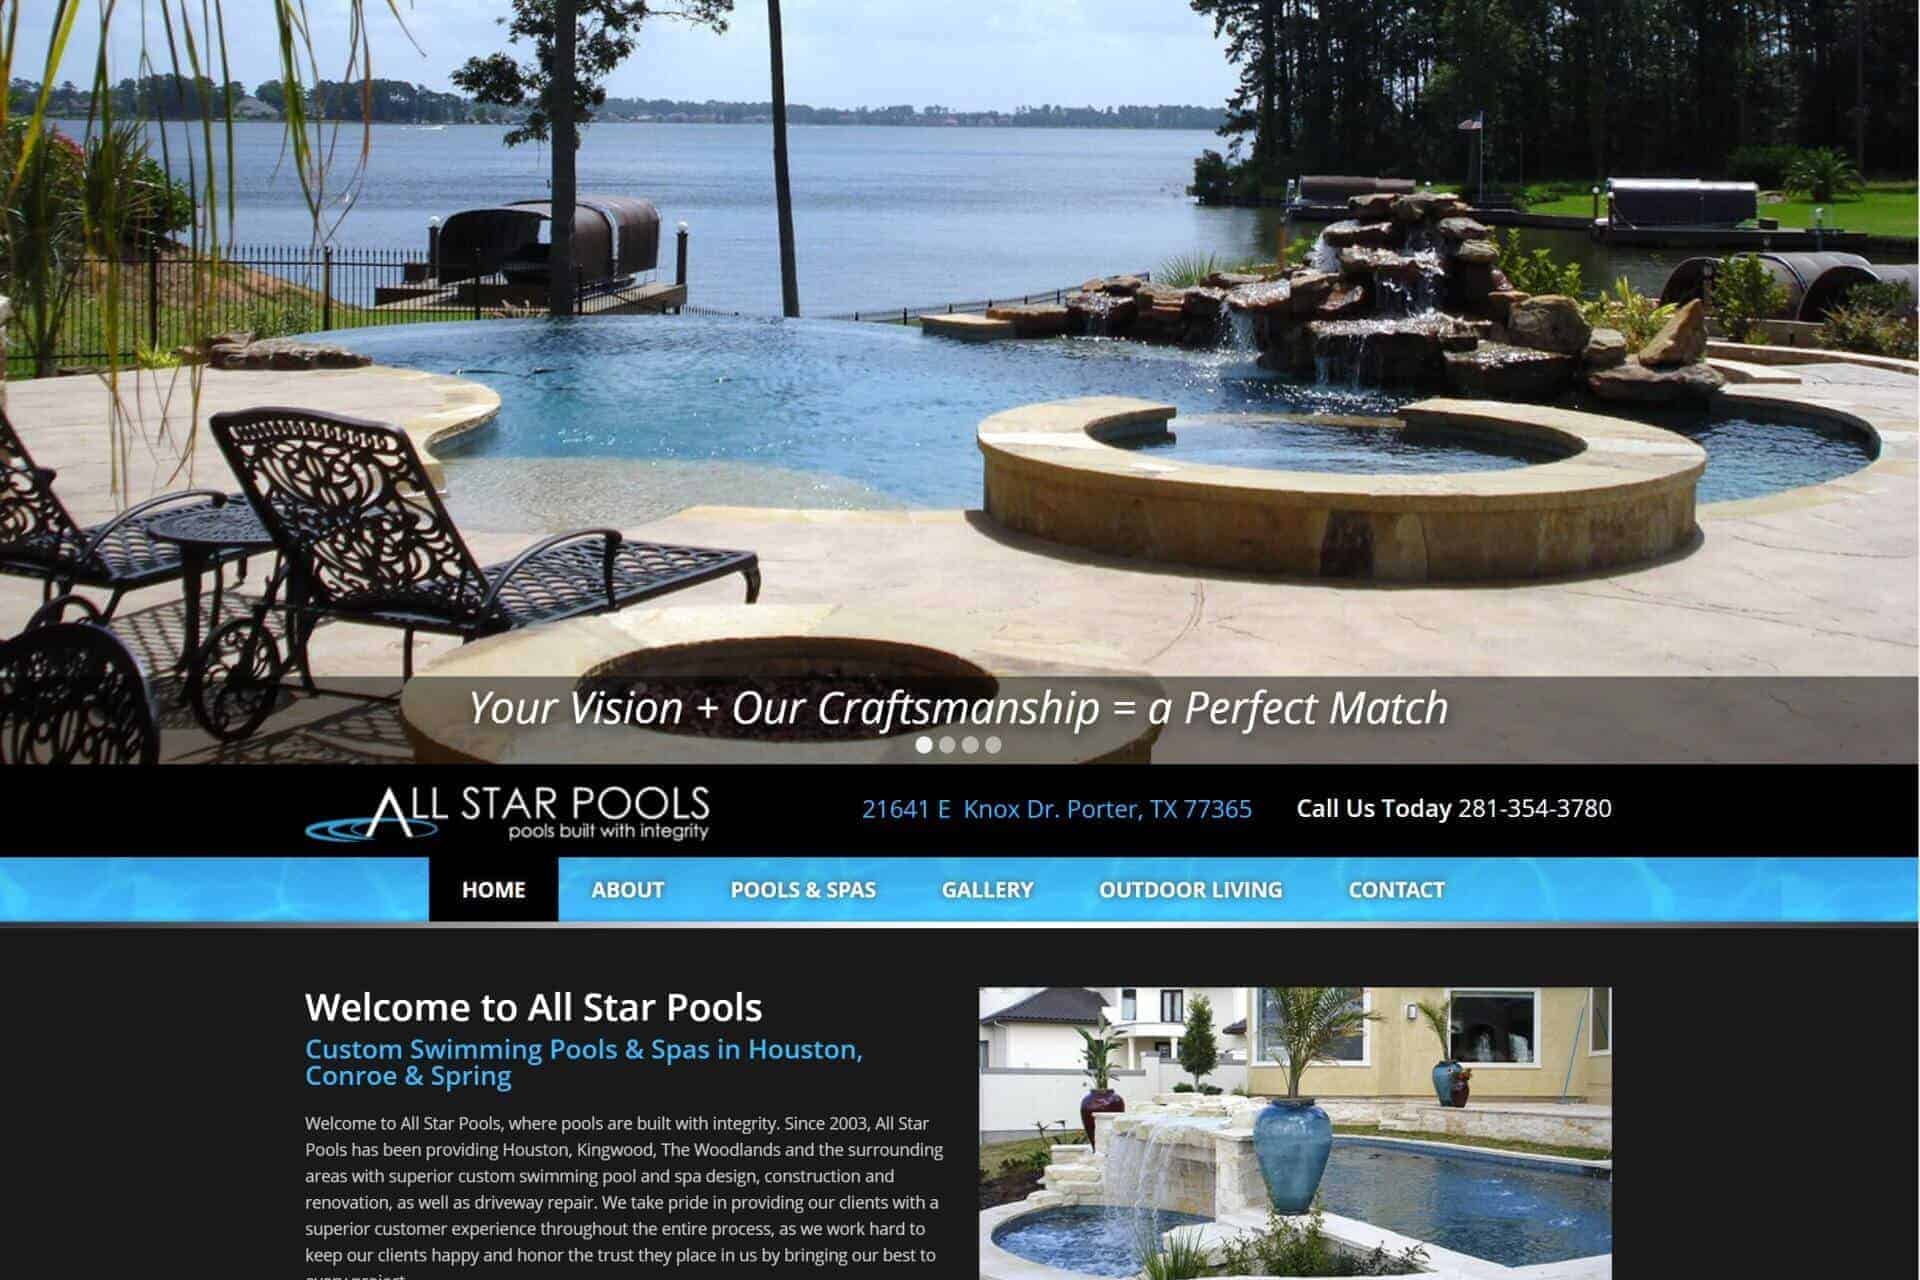 All Star Pools by Alford Benefits